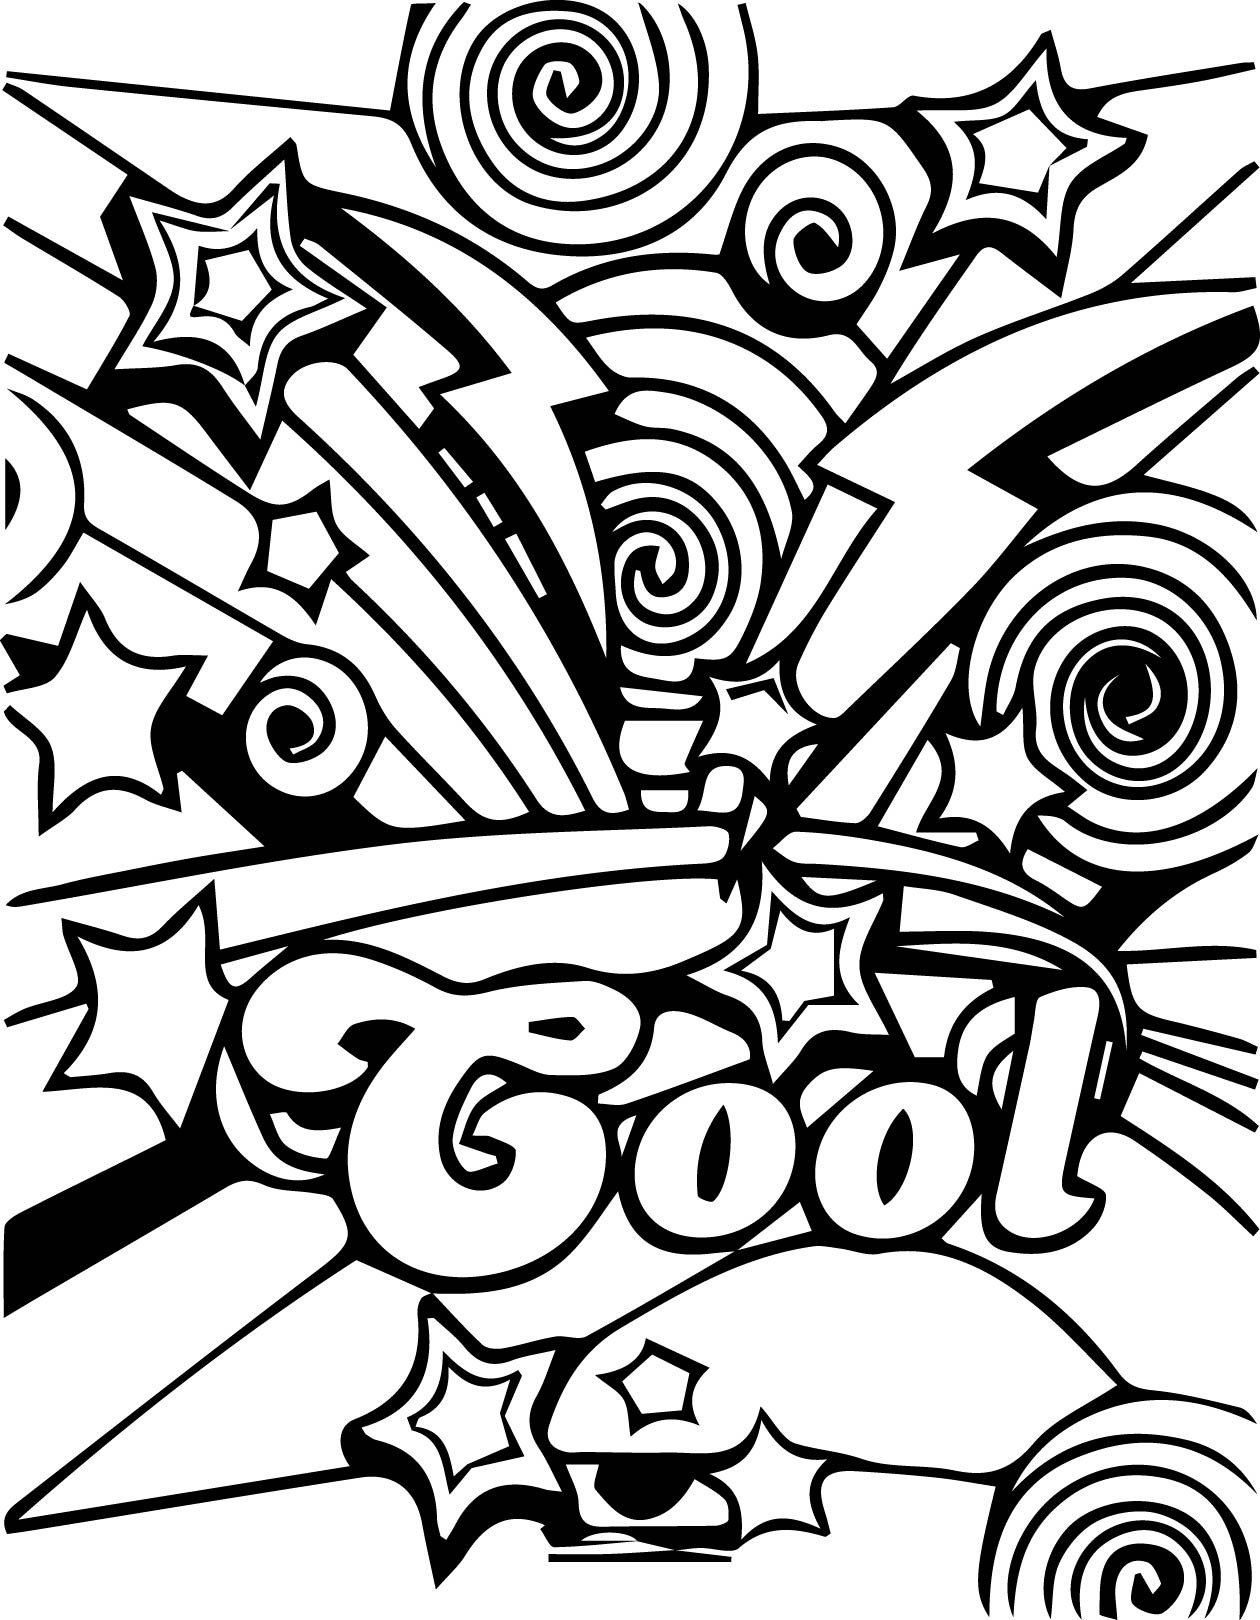 Awesome Coloring Pages
 Cool Coloring Pages coloringsuite